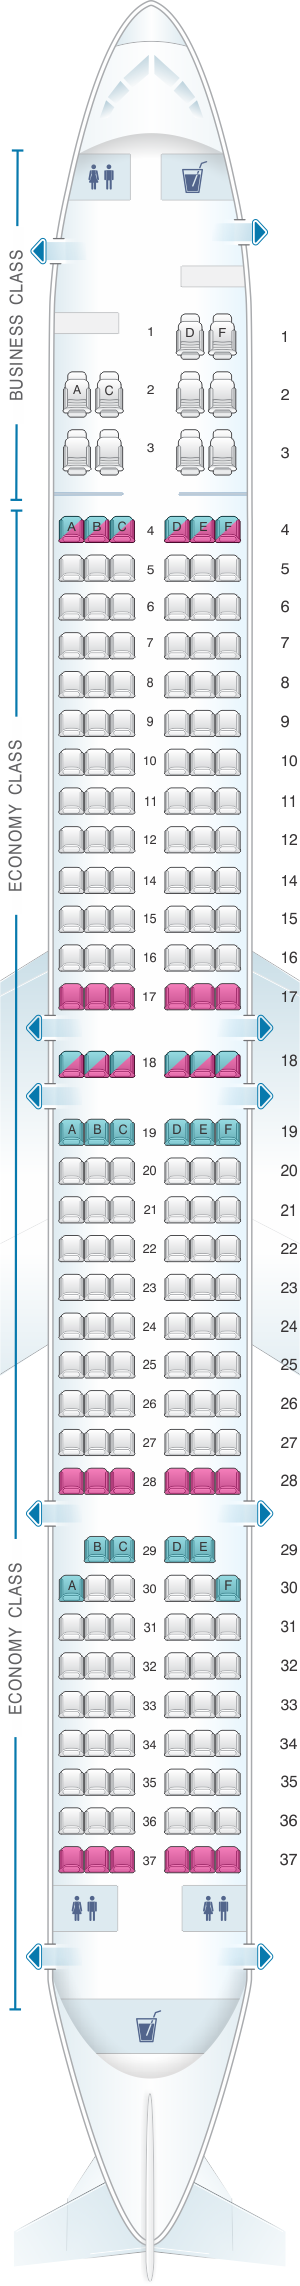 United Airlines Boeing 737 900 Seating Chart